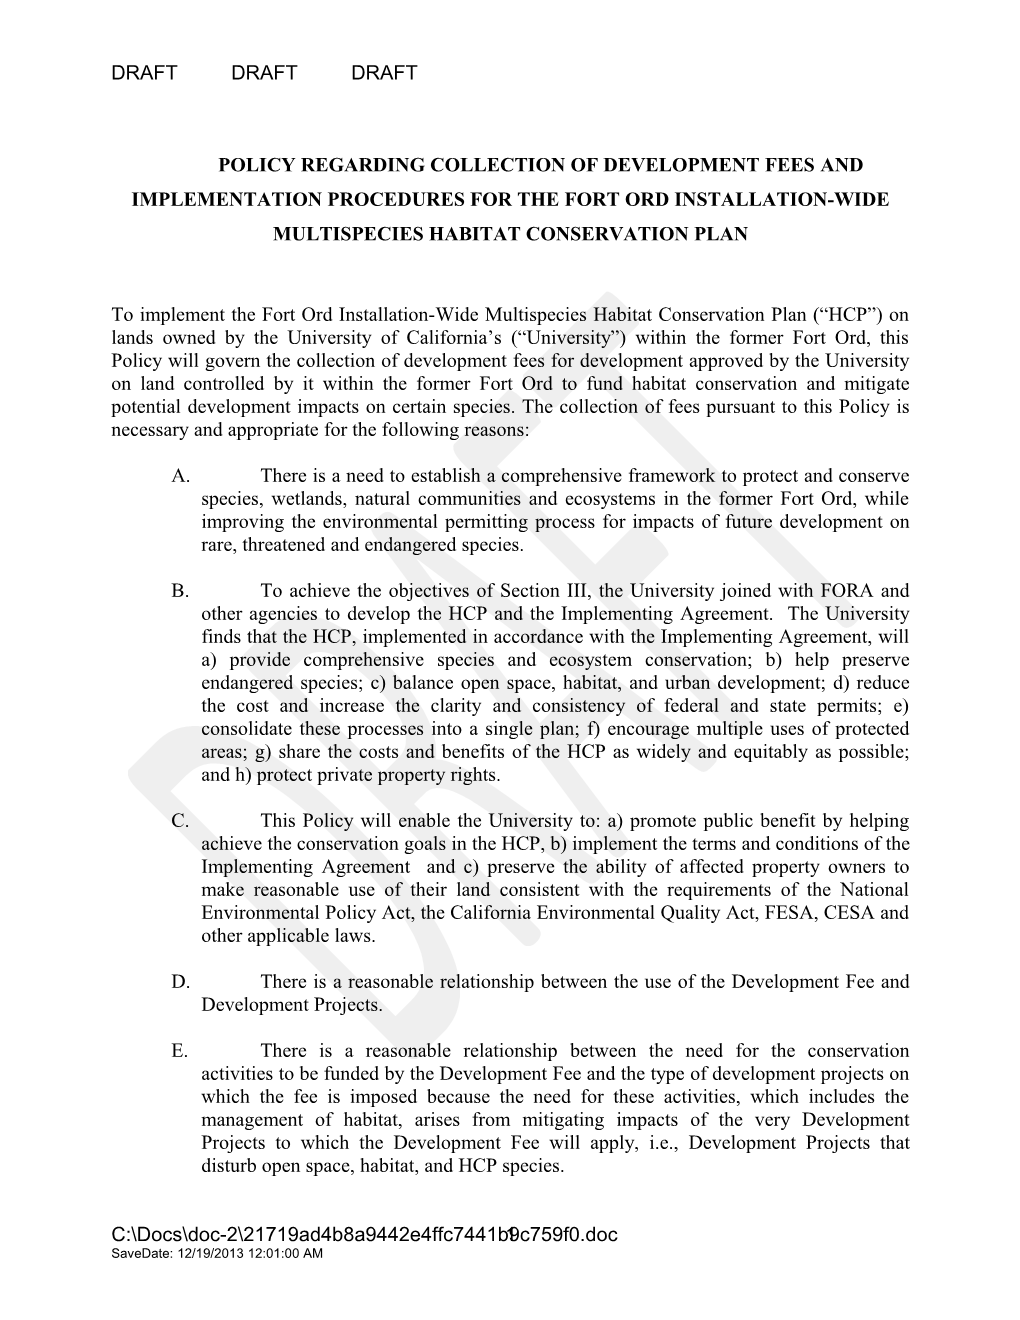 POLICYREGARDING COLLECTION of DEVELOPMENT FEES and Implementation Procedures for the Fort